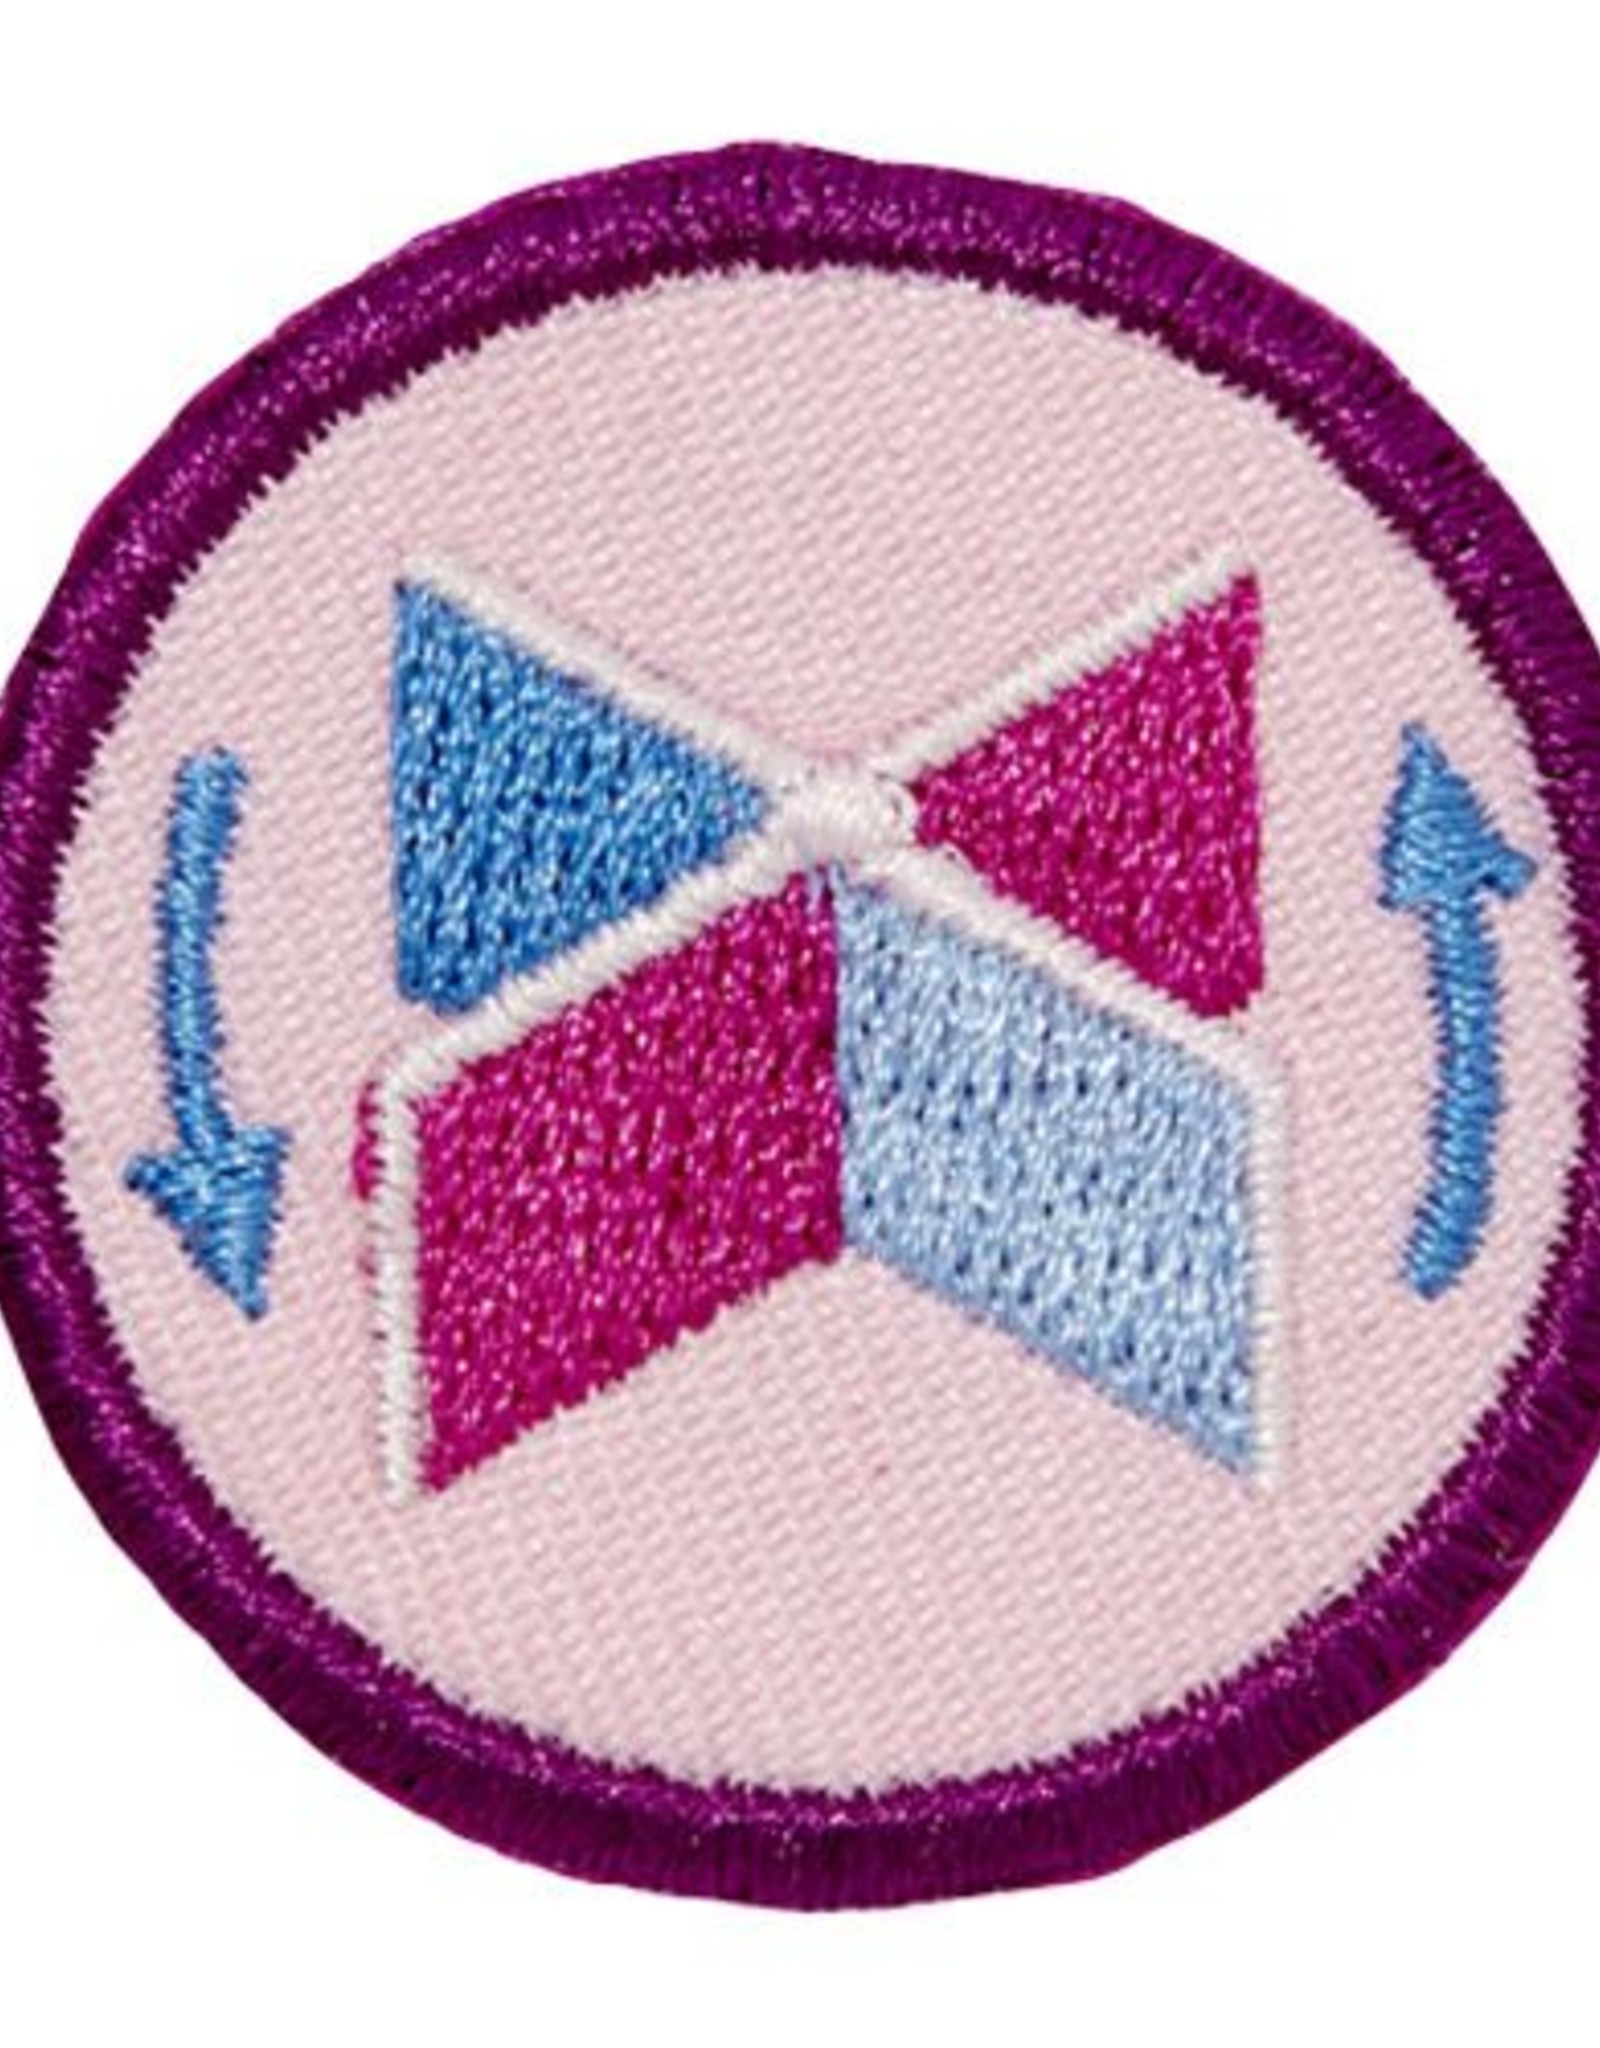 GIRL SCOUTS OF THE USA Junior Mechanical Engineering: Paddle Boat Badge